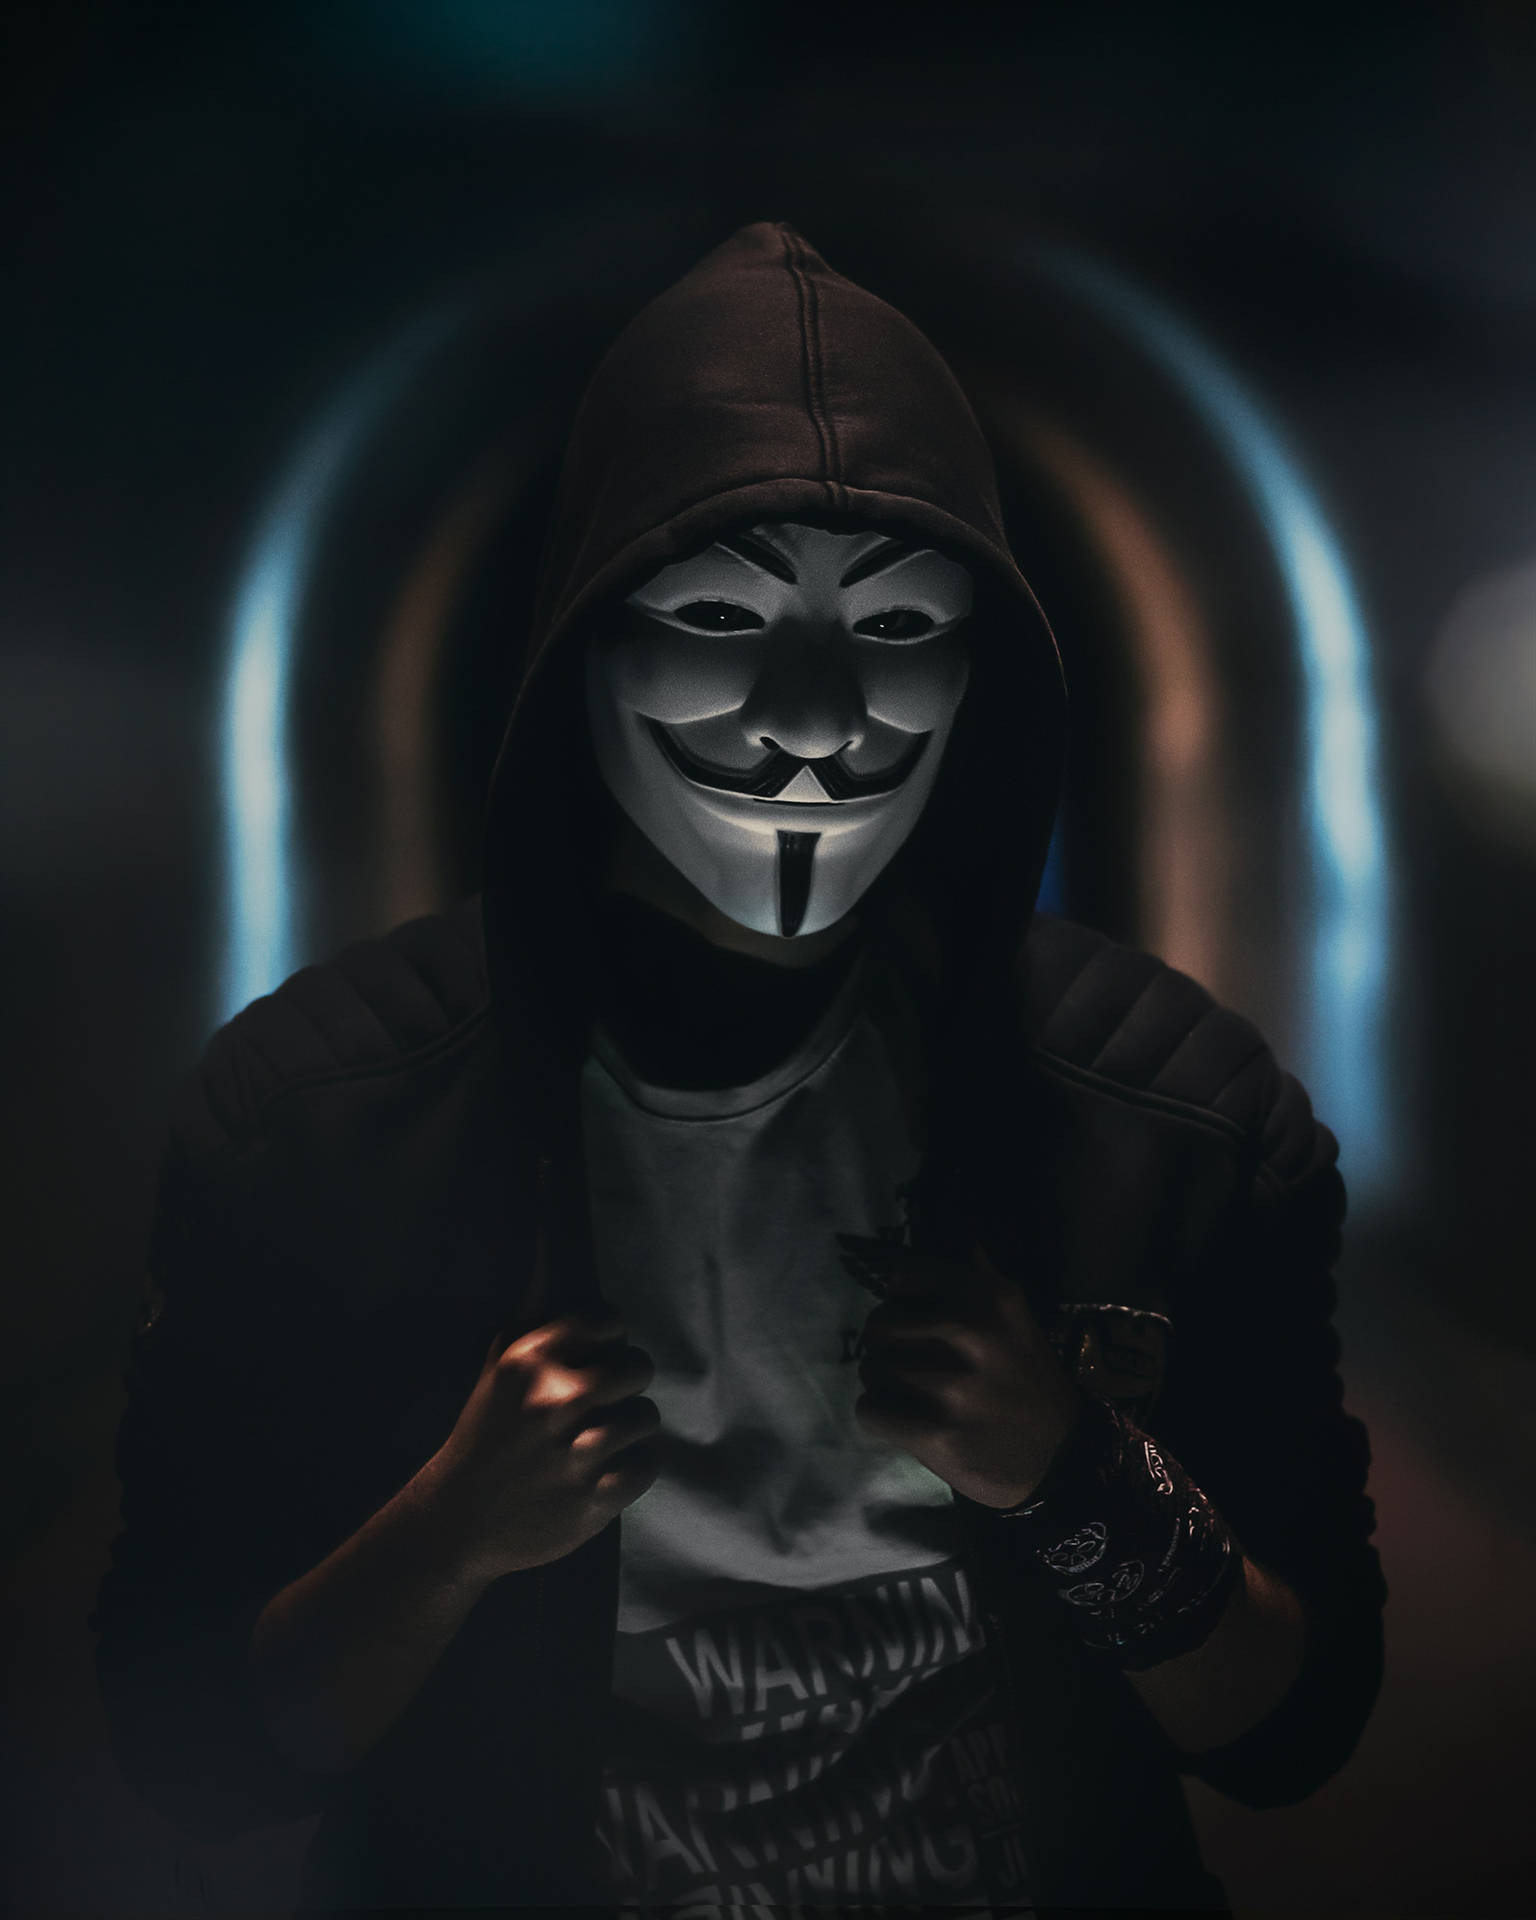 Anonymity Hidden by a Mask Wallpaper